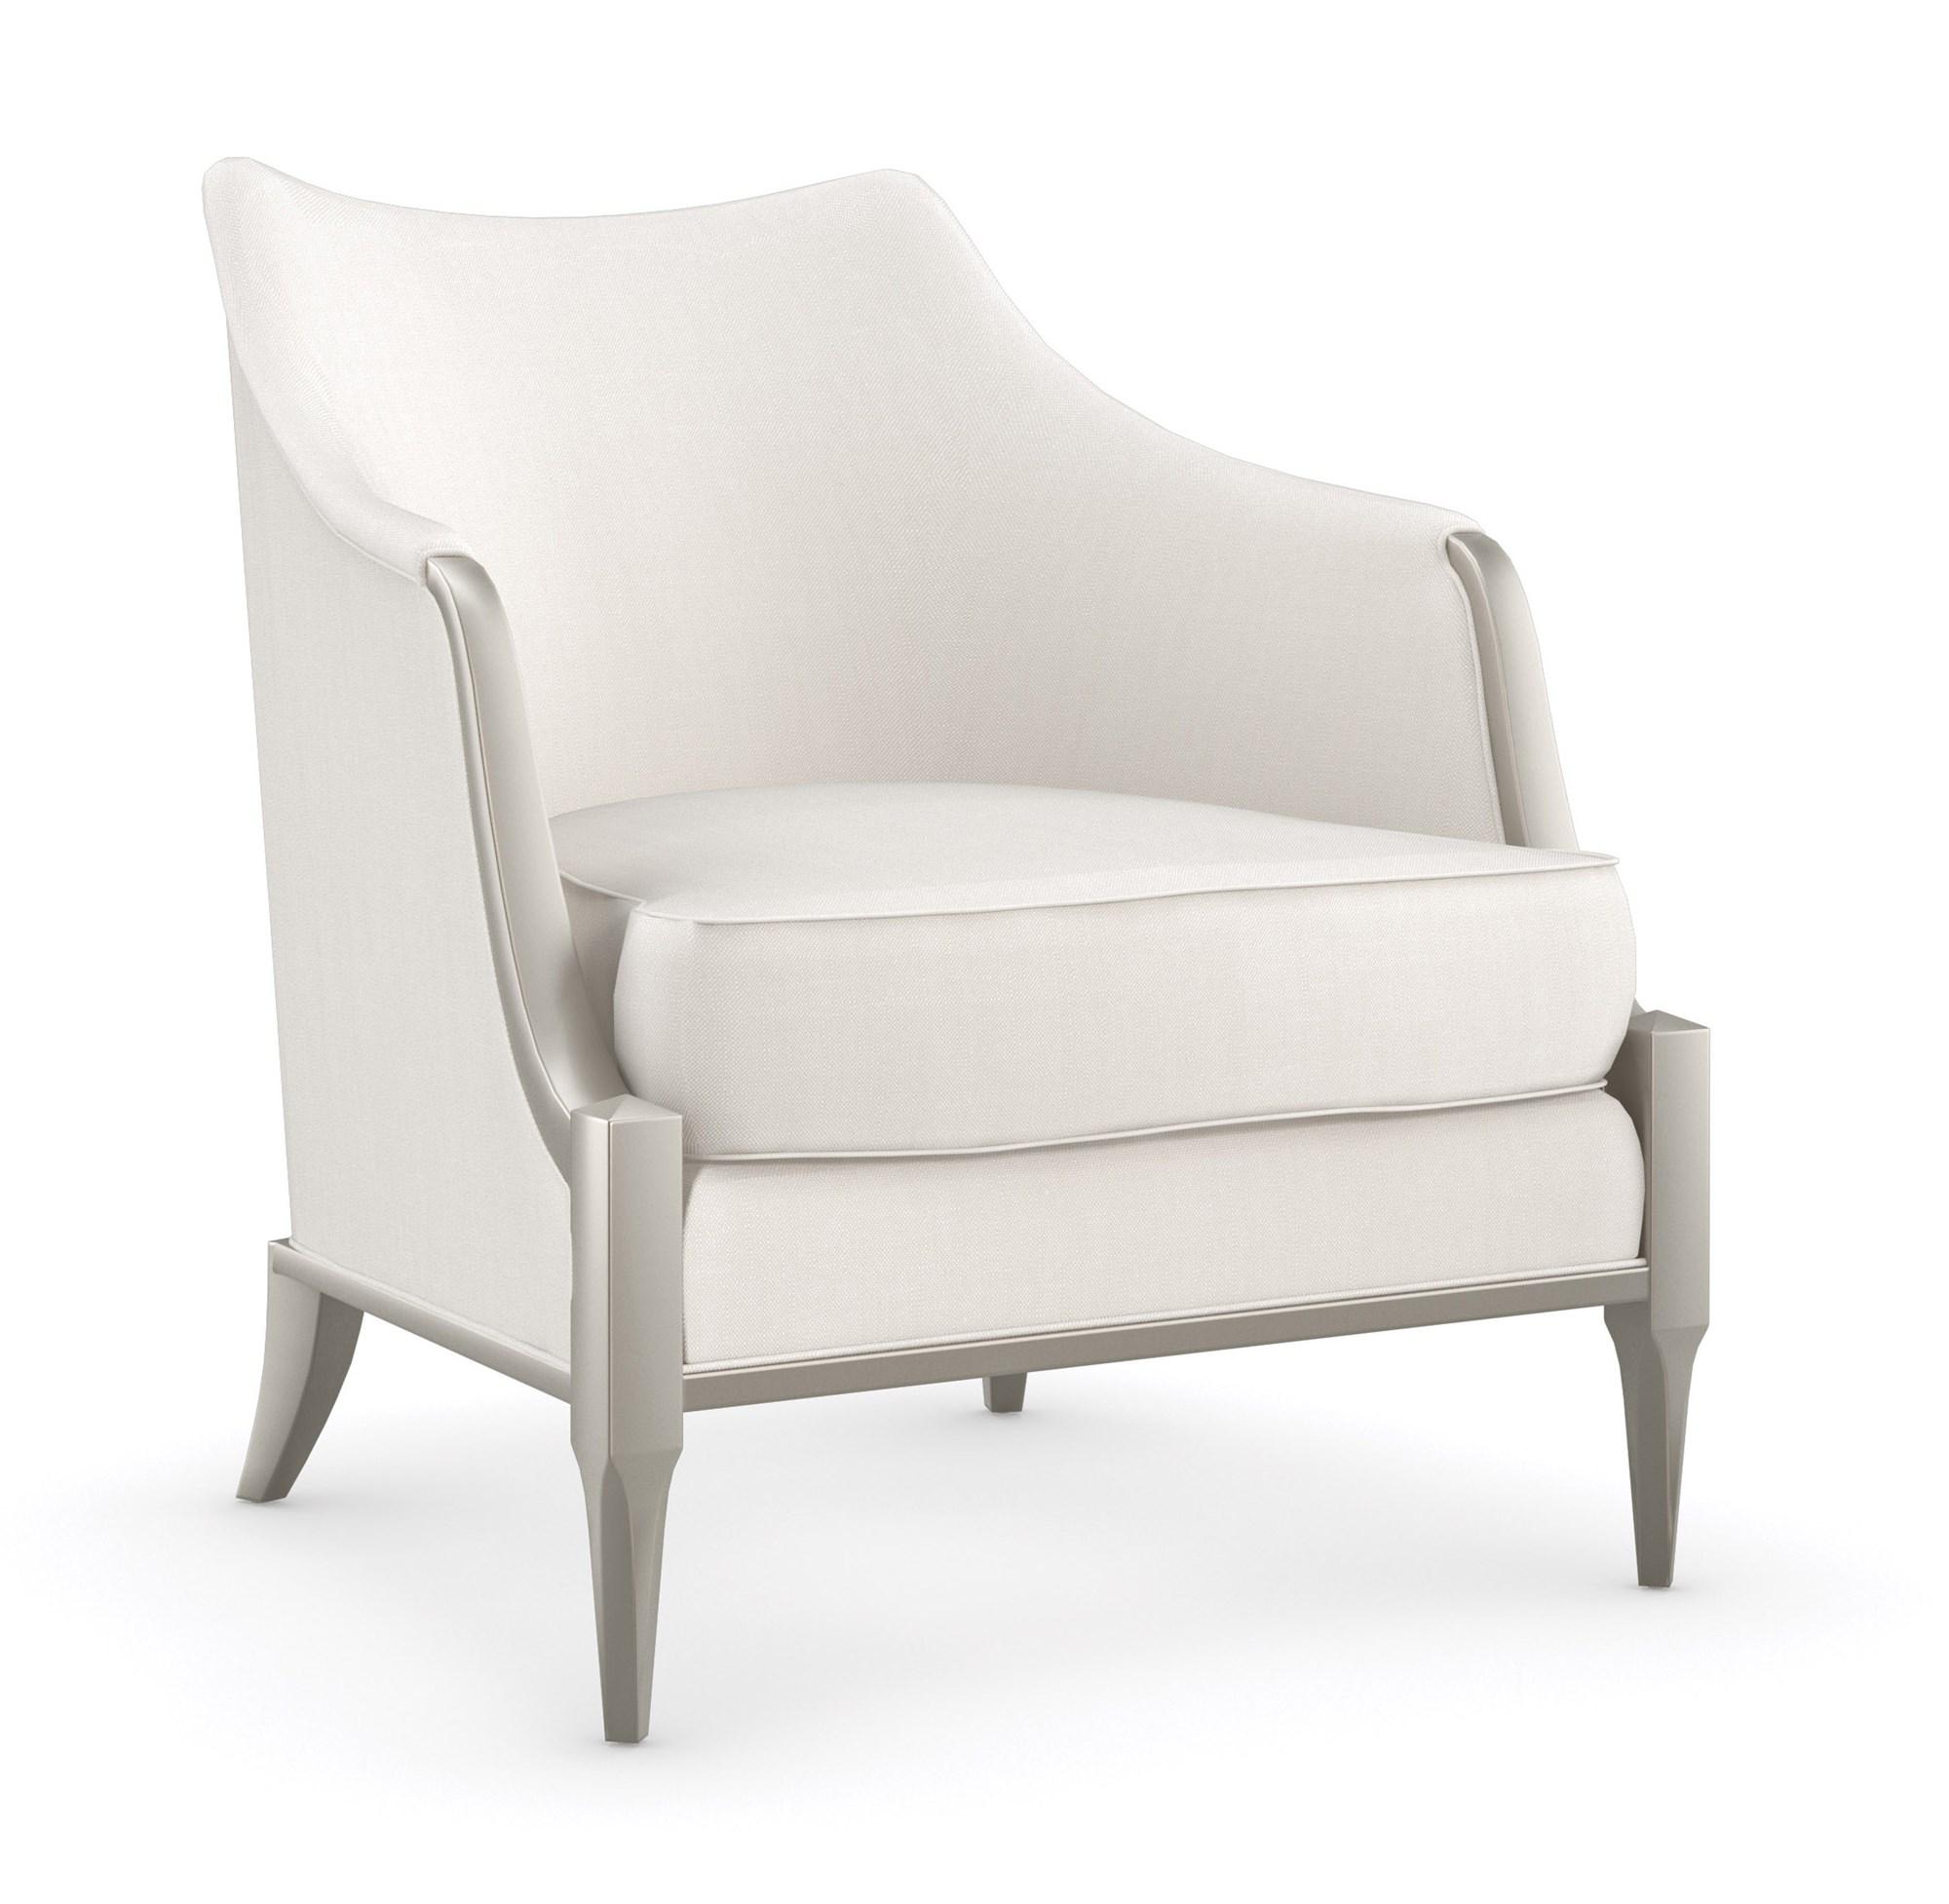 Traditional Accent Chair SWEET AND PETITE UPH-020-131-B in Light Gray Fabric